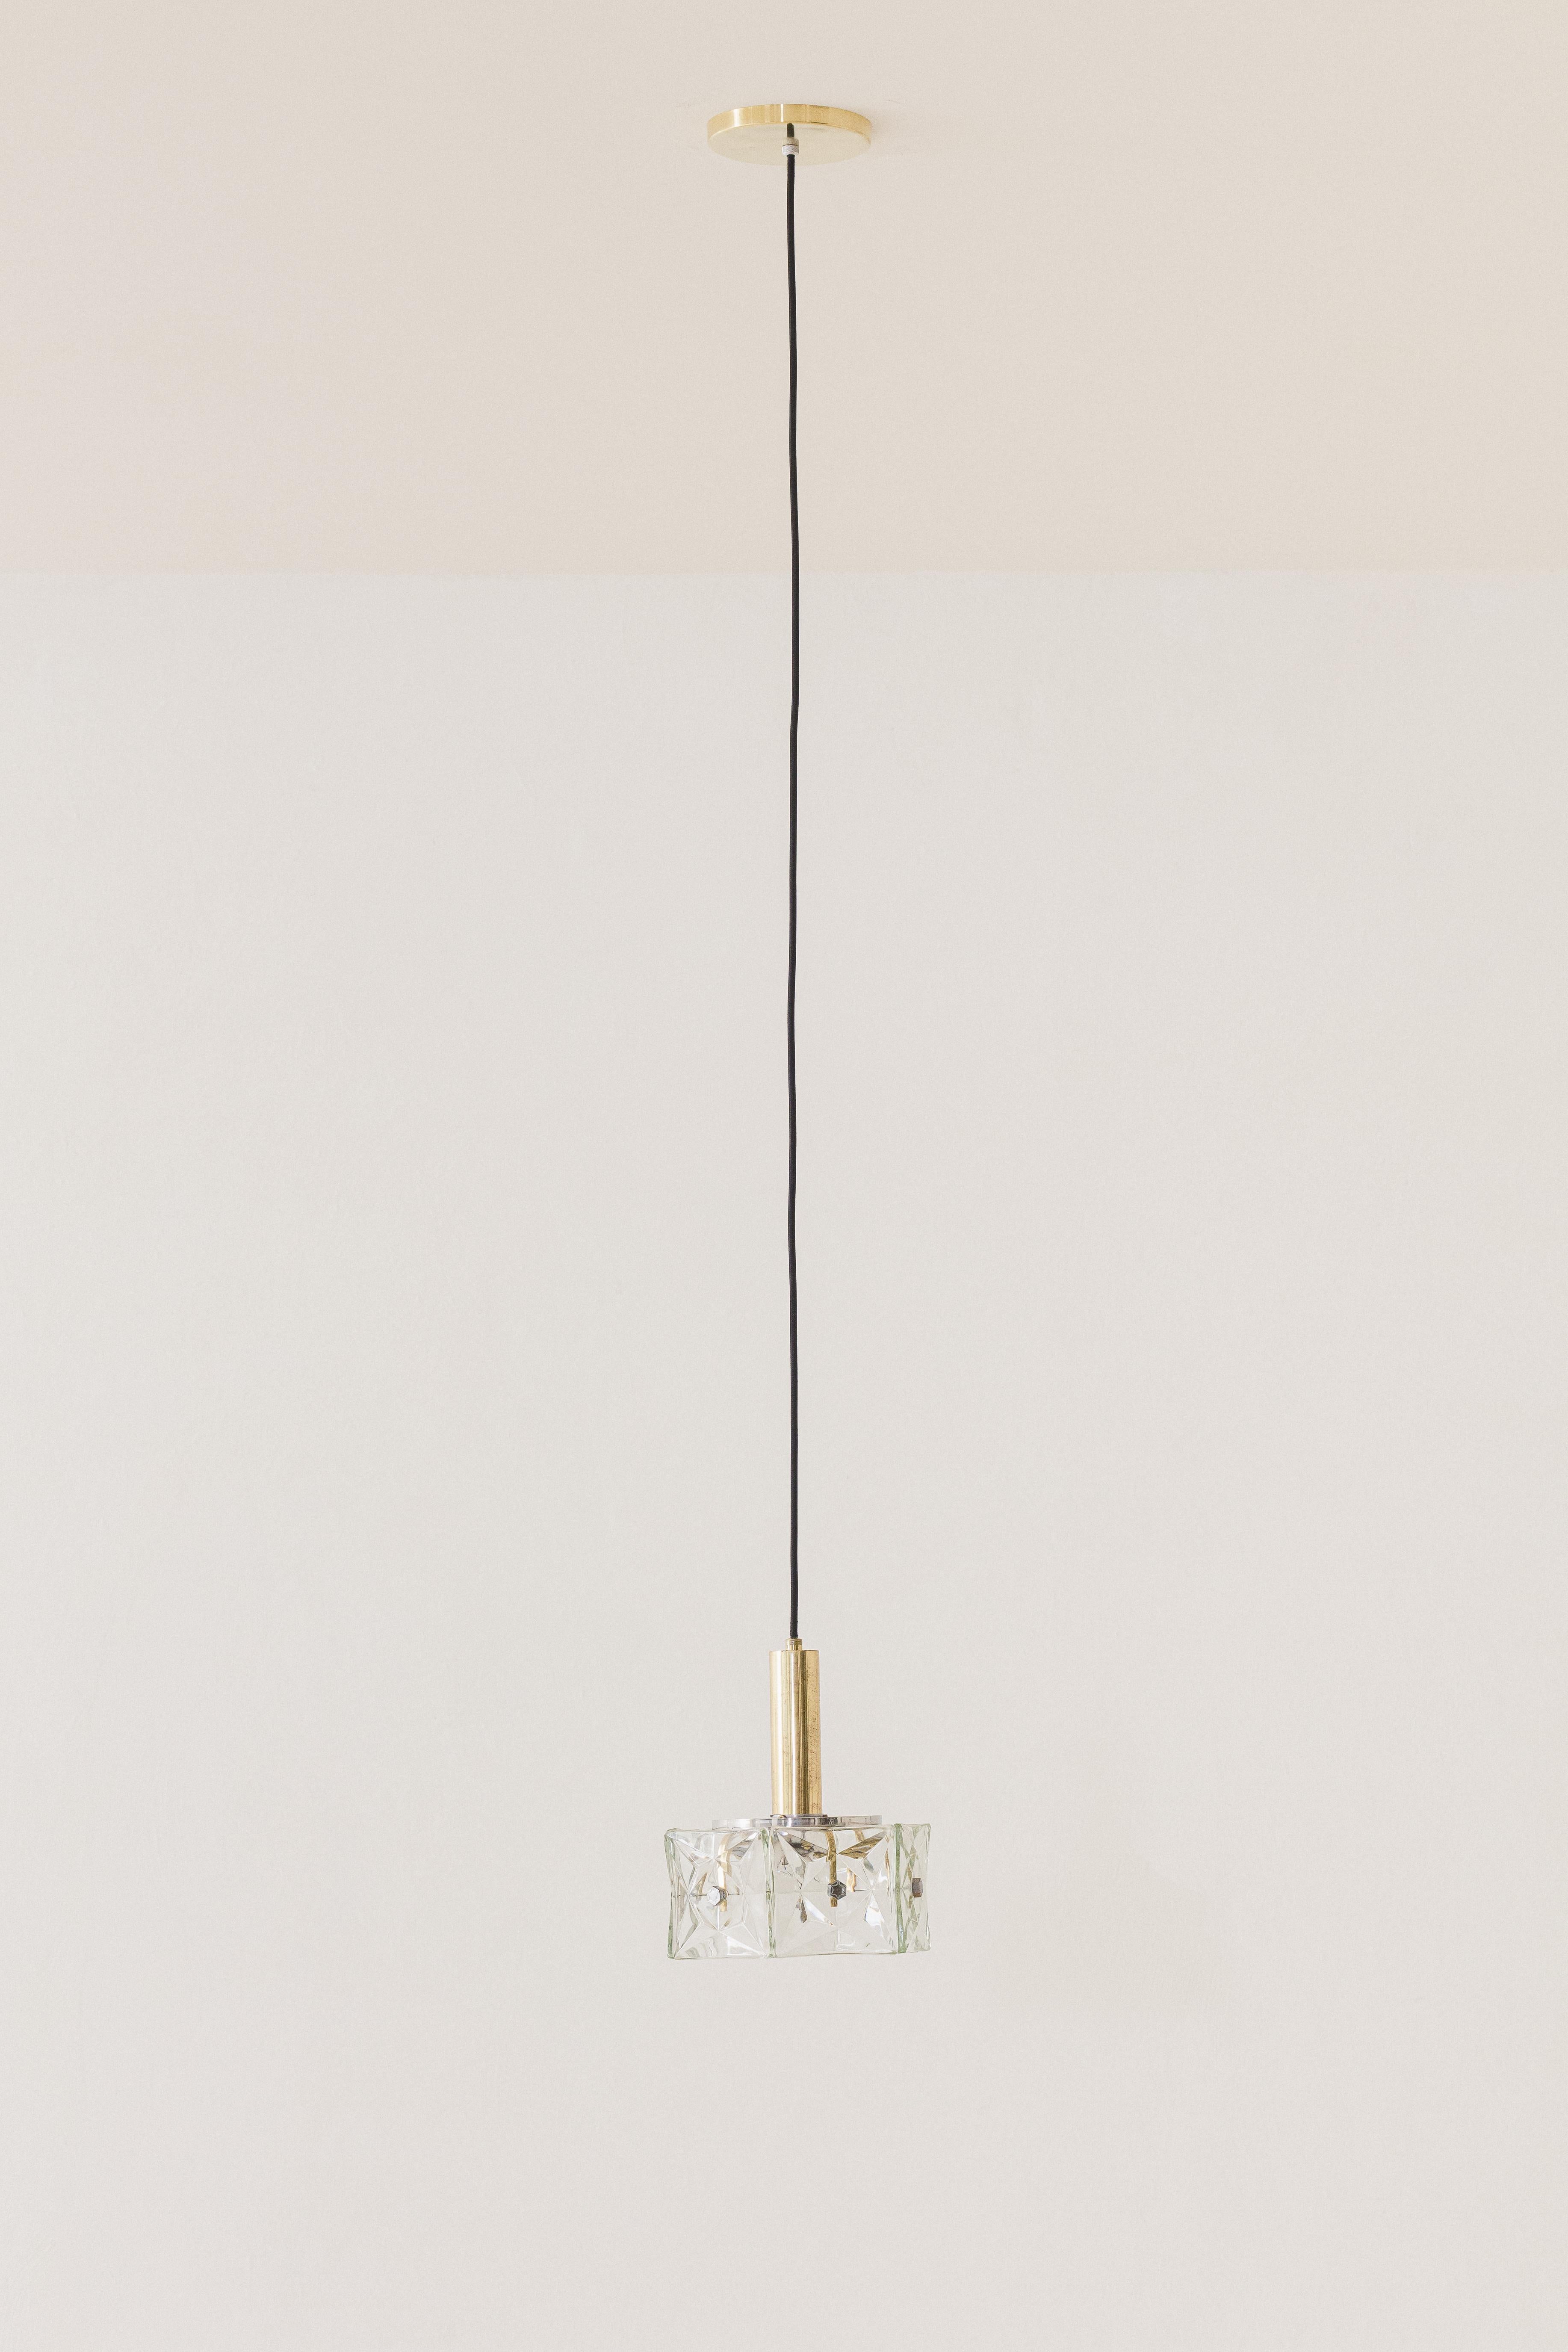 Mid-Century Modern Vintage Pendant Lamp by Lustres Pelotas, Brass and Prismatic Glass, Brazil 1950s For Sale